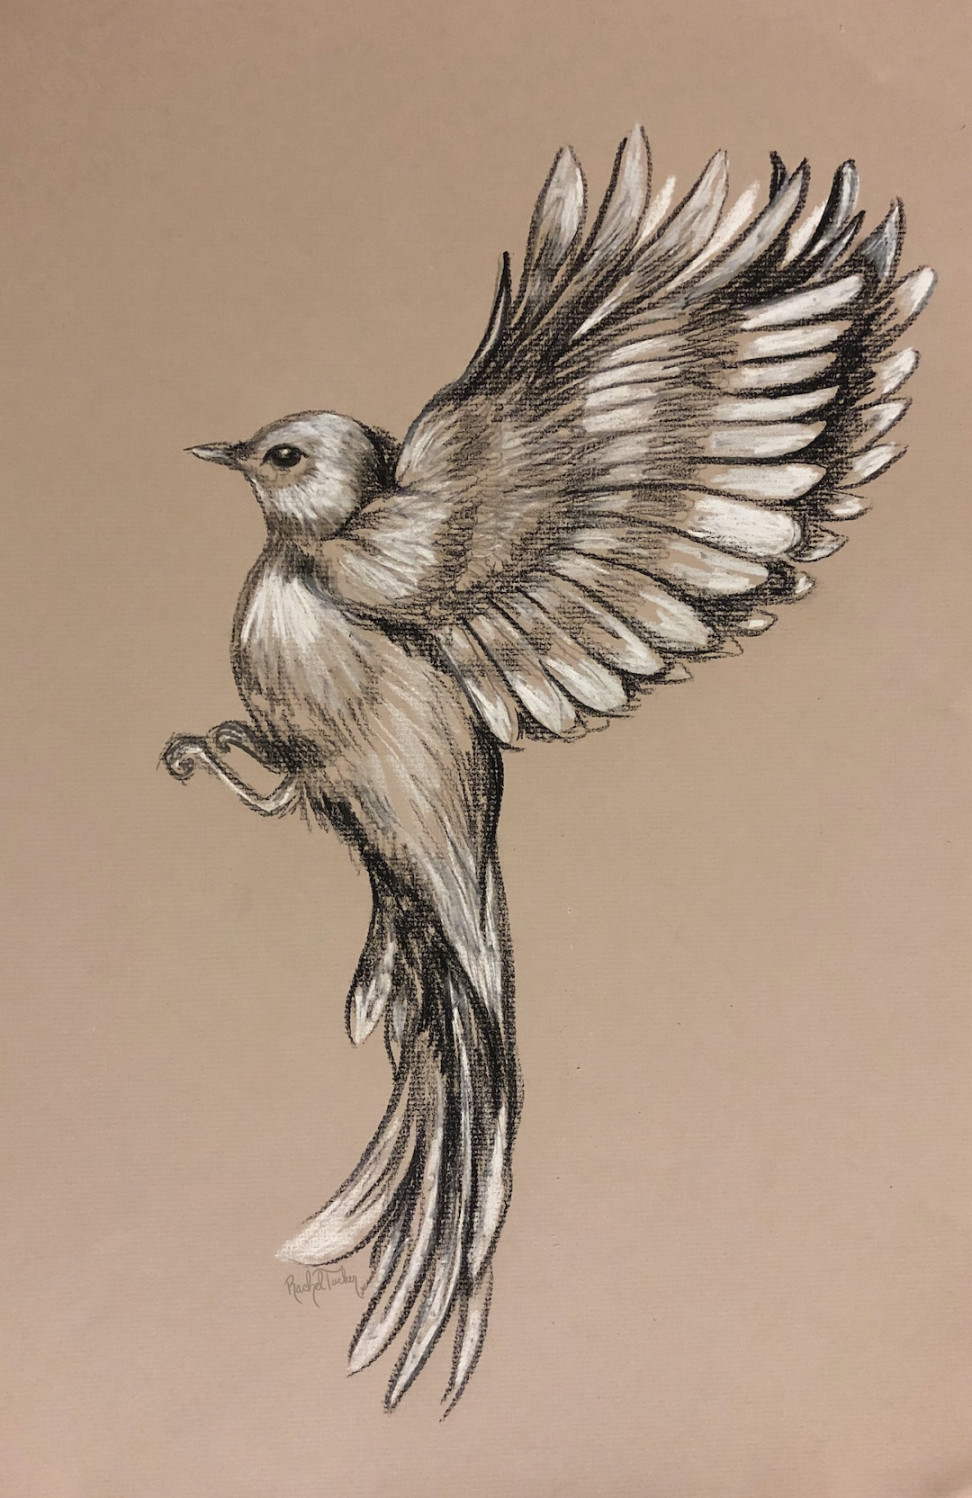 Flying-Original Drawing in Charcoal on Pastel Paper, Bird in Flight, Wings,  Minimalist, Peaceful, Freedom, bird drawing - Etsy